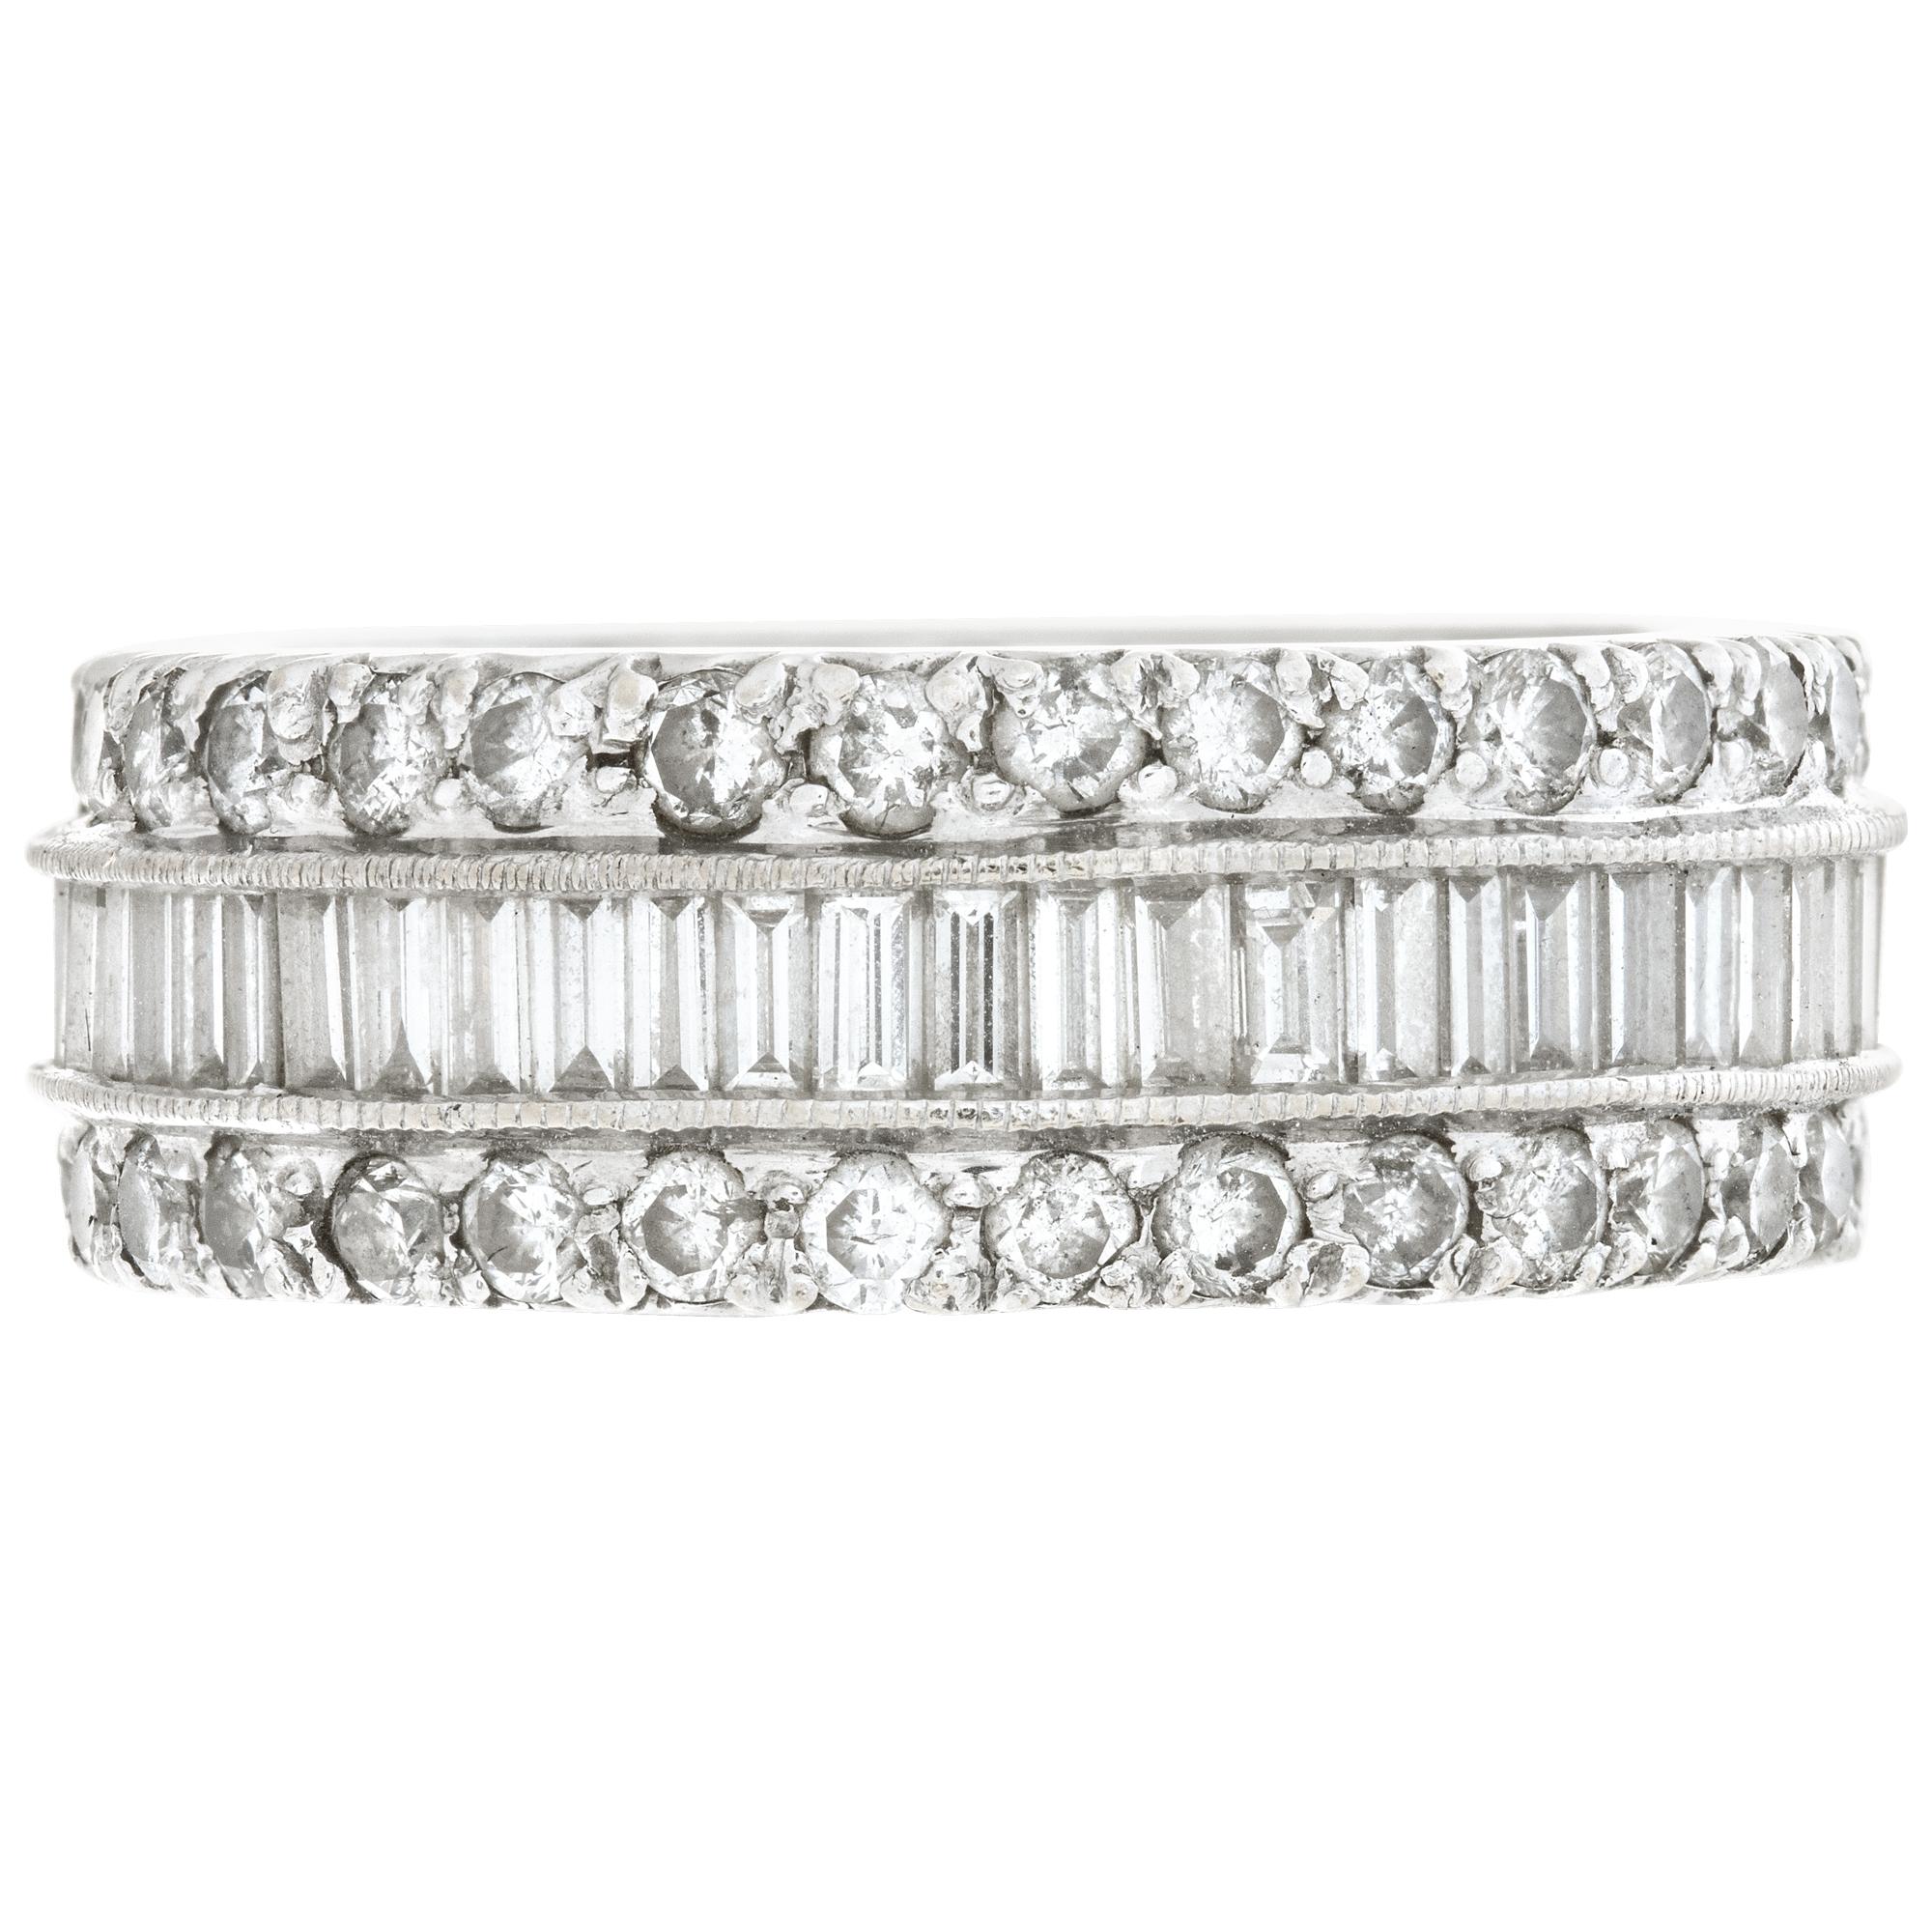 Eternity diamonds ring with approx 4.50 carats emerald and round brilliant cut diamonds set in 18K white gold. Diamonds estimate: G-H color, VS clarity. 8mm wide. Size 6.75
